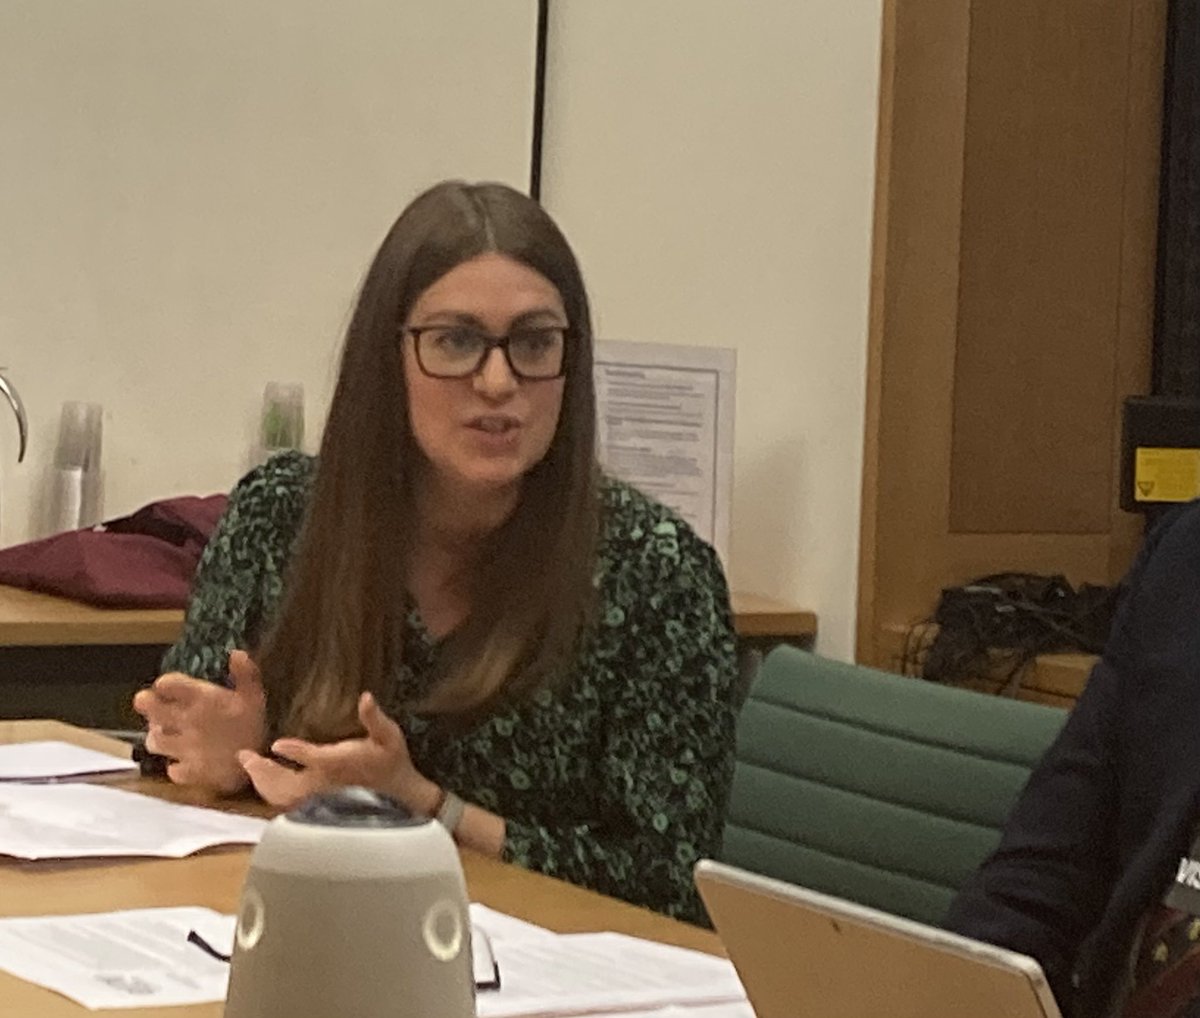 @Justforkidslaw Head of Policy and Public Affairs, Natalie Williams, talked about their support for child victims to ensure their legal rights are respected. She spoke of cases where children have been excluded due to behaviour they have been coerced into by those exploiting them